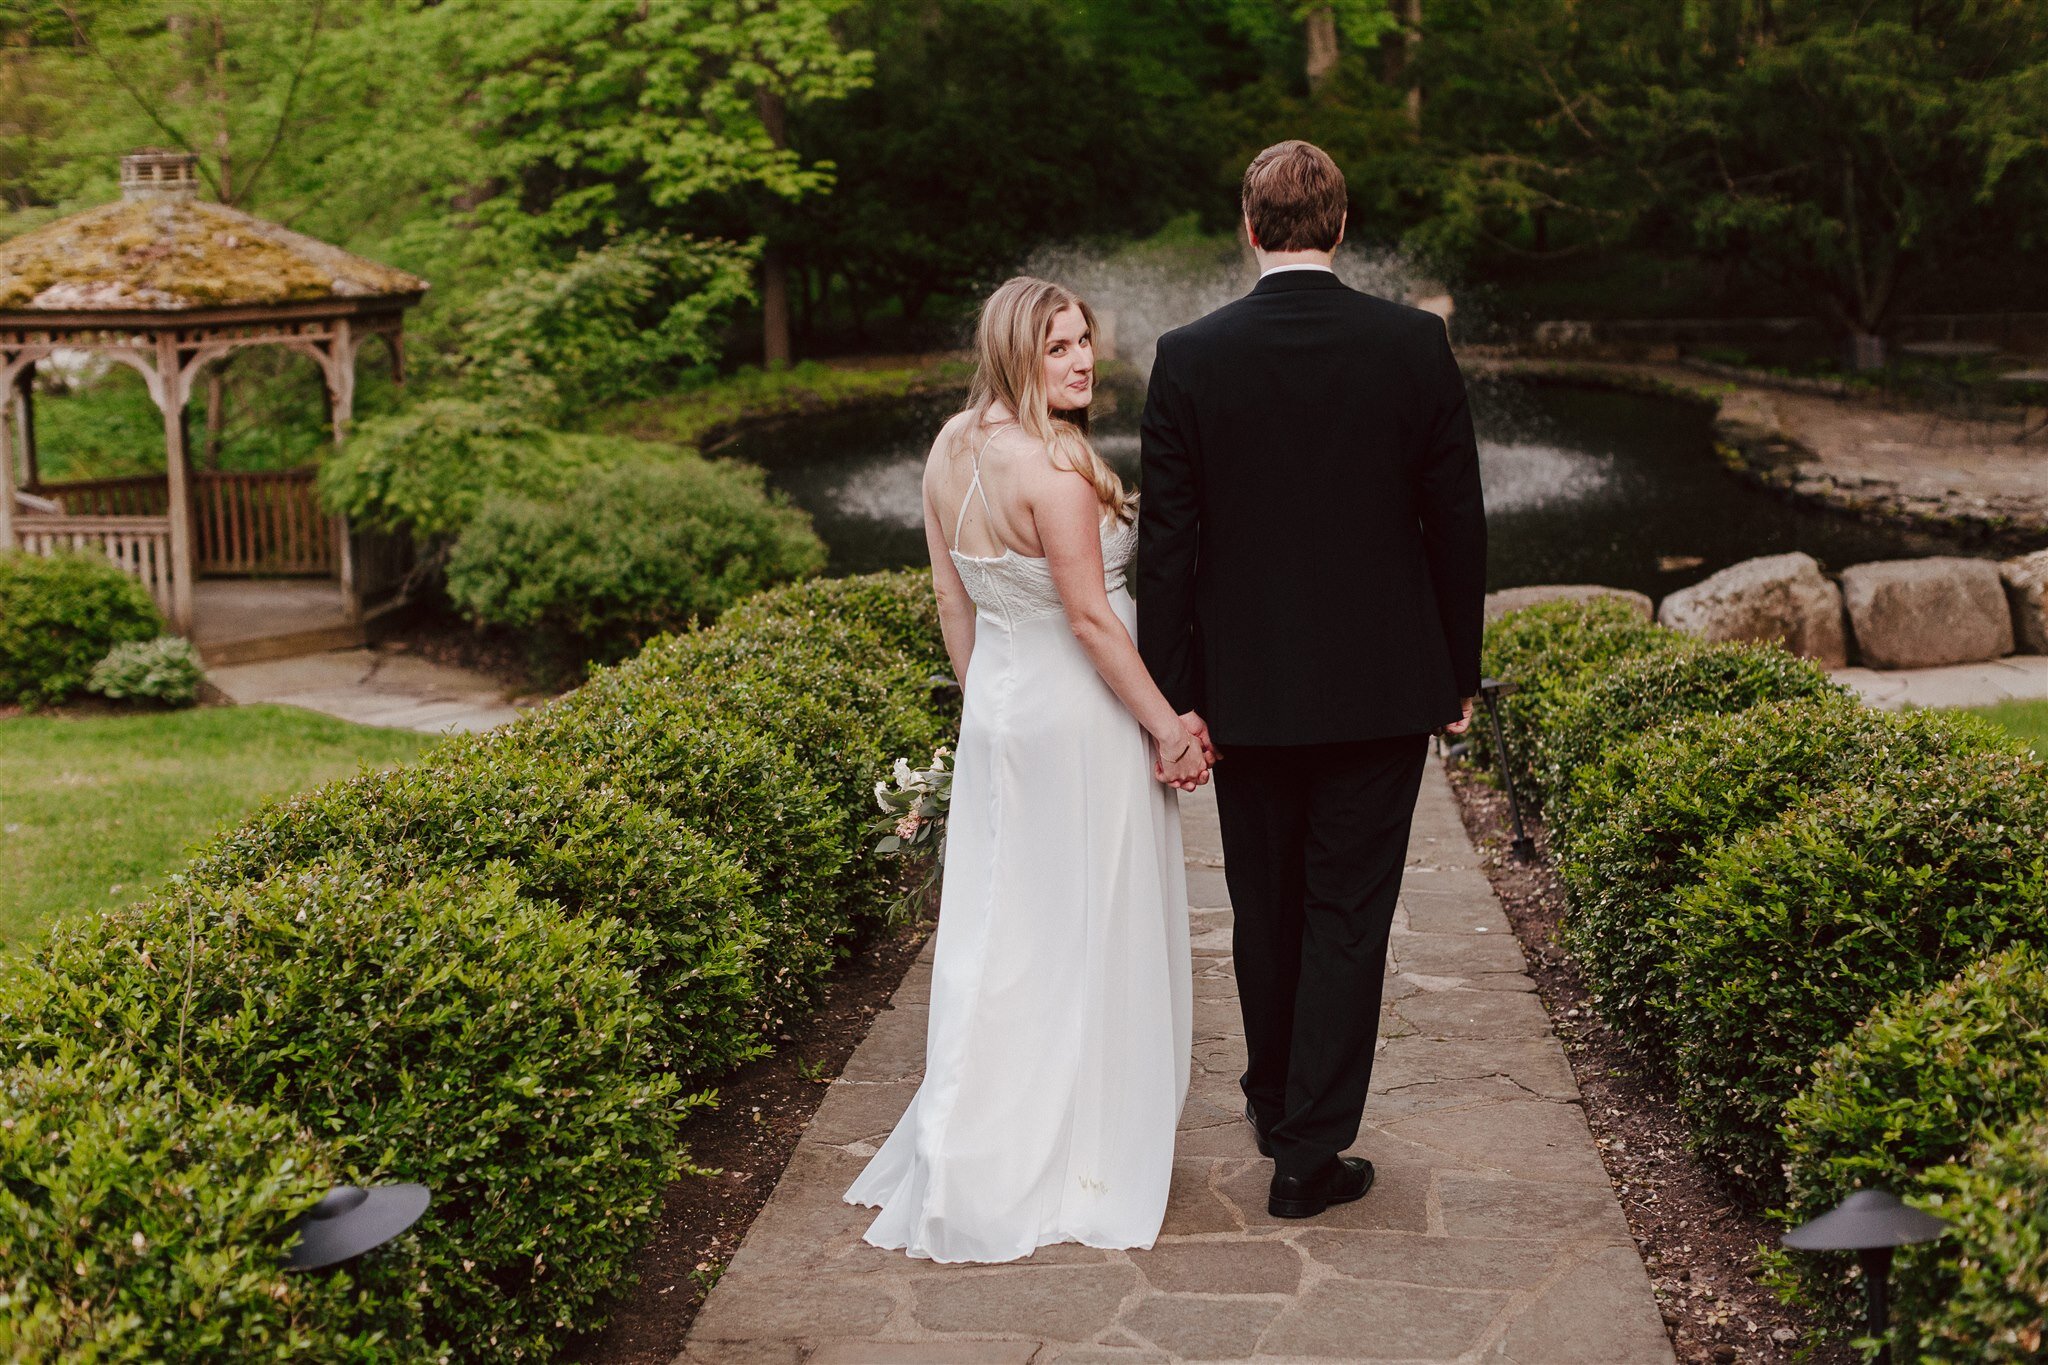 Kate and Adam’s journey to their wedding was anything but traditional! With their original plans for a large reception being dashed by Covid-19, So they eloped at their venue, HollyHedge in New Hope, PA surrounded by family and friends. Photographed…